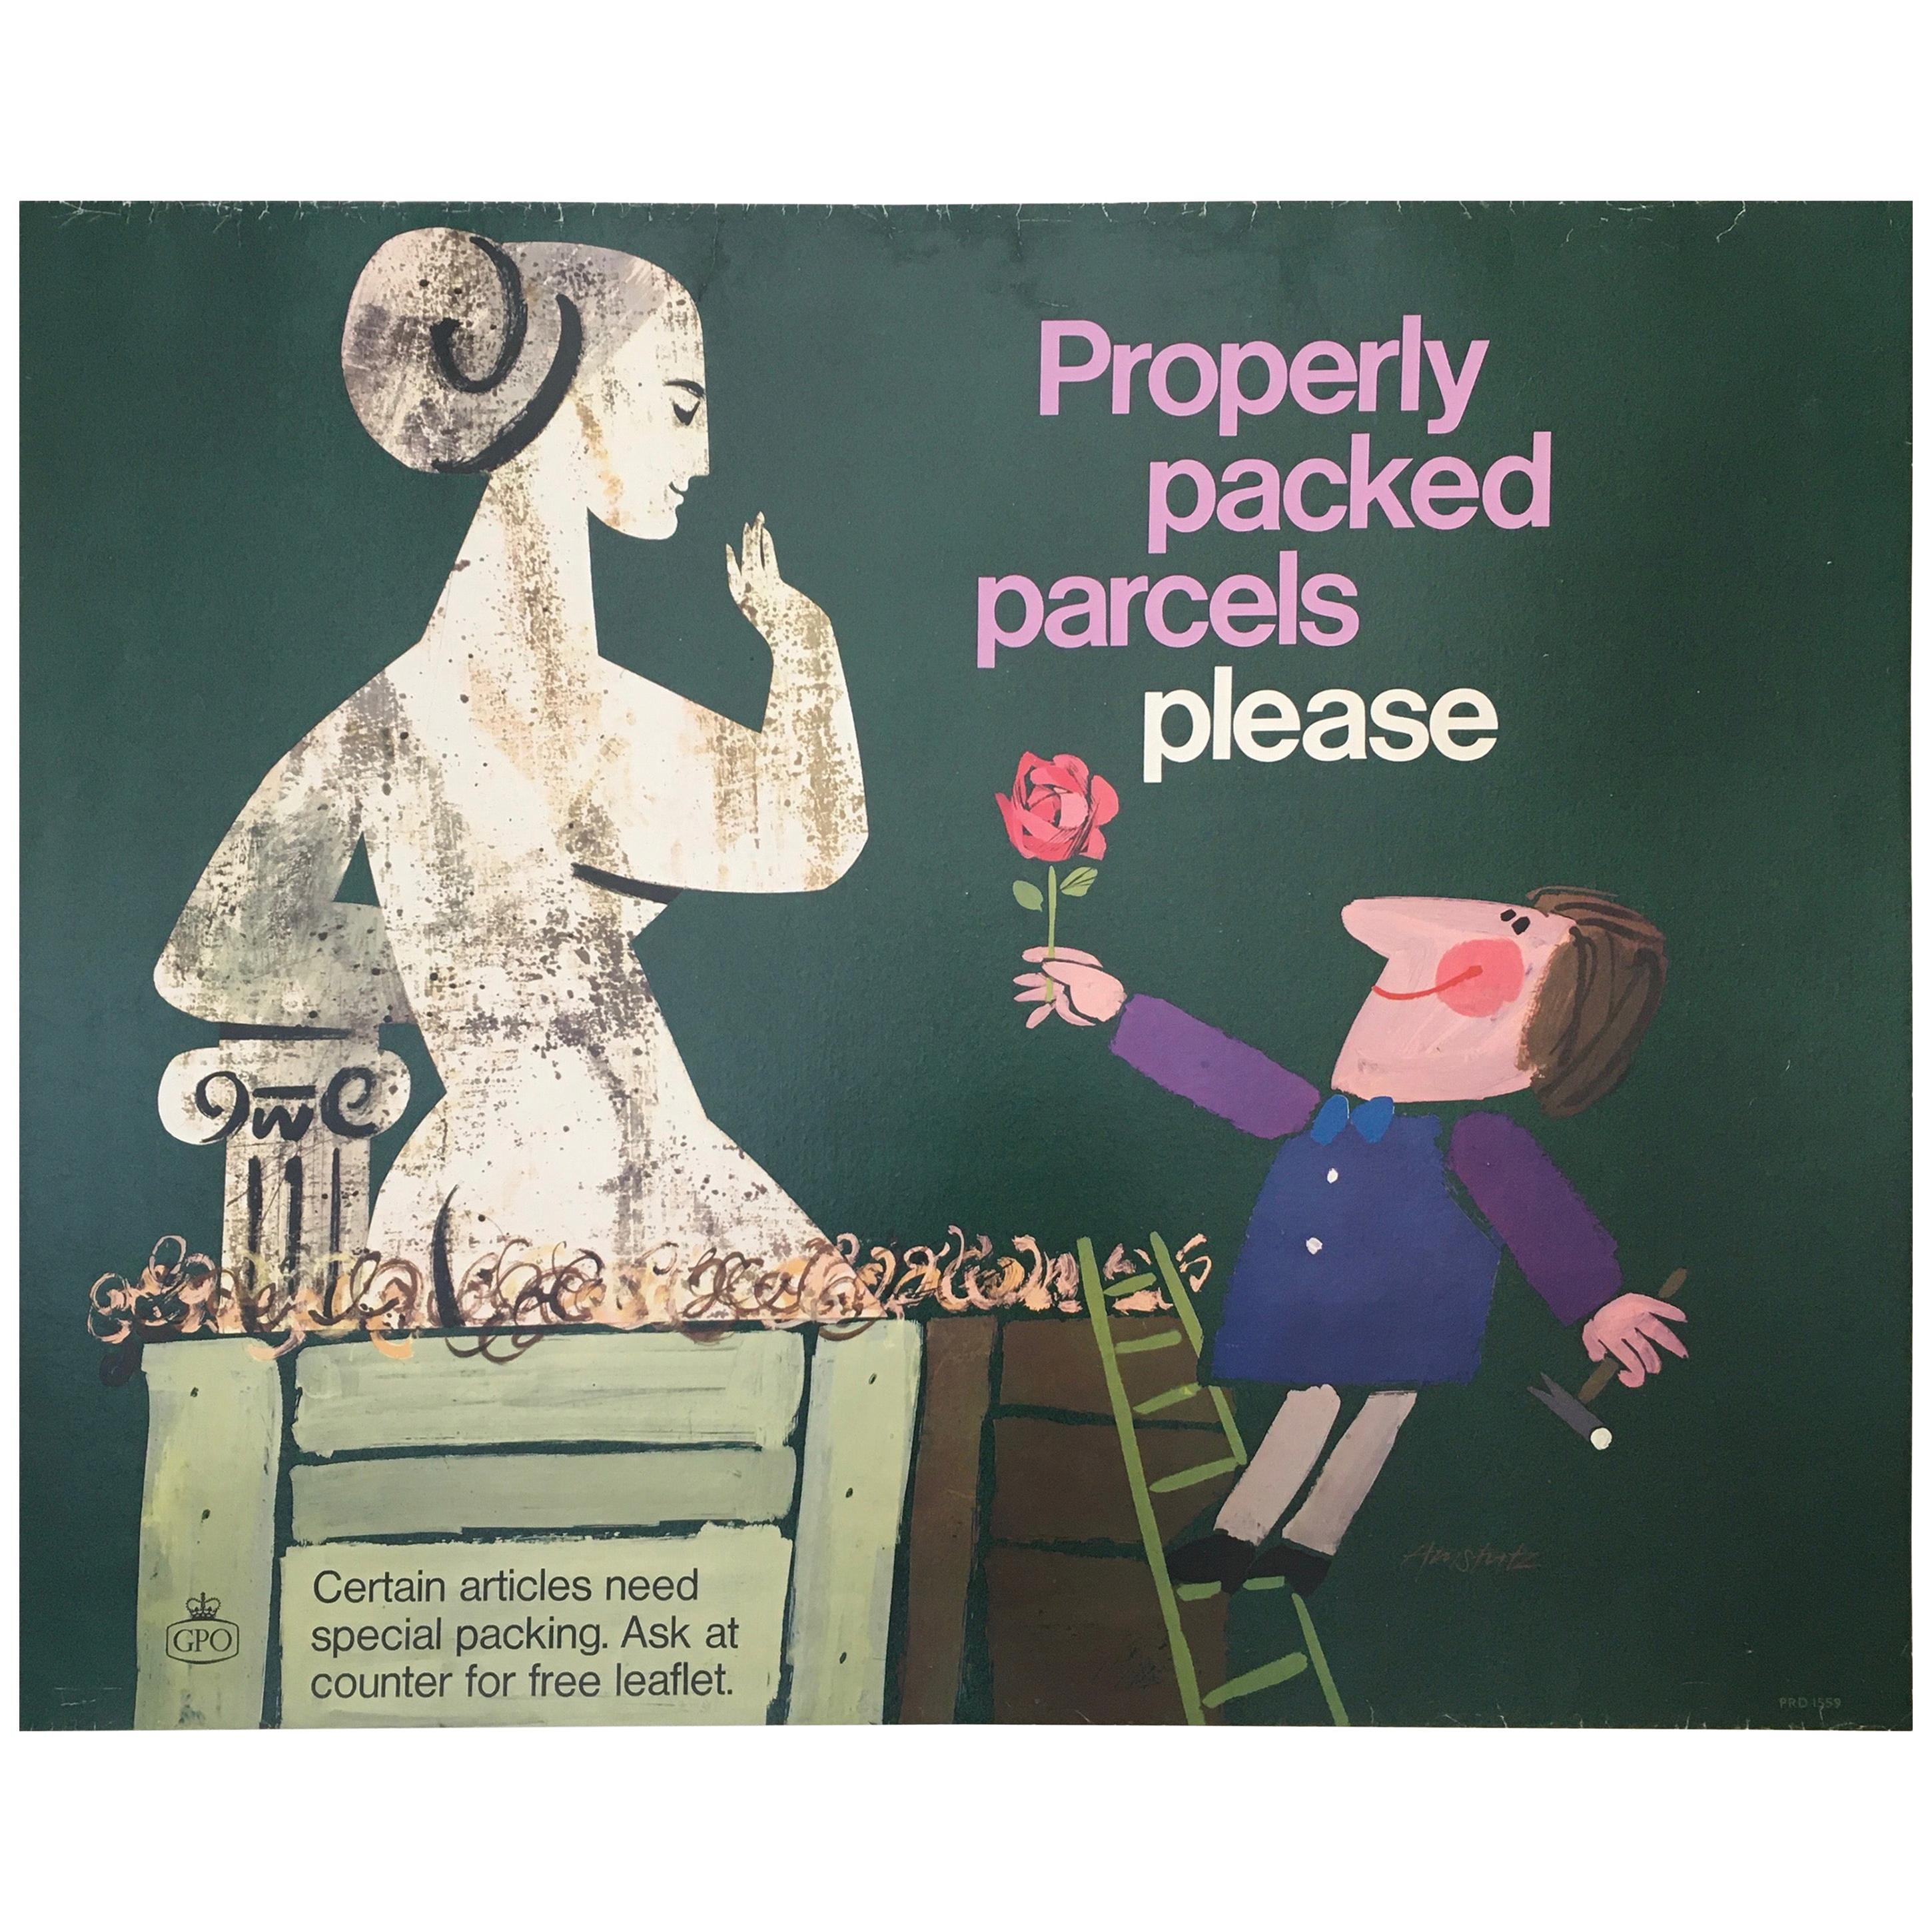 Properly Packed Parcels Please, GPO Statue Original Vintage Poster, circa 1960